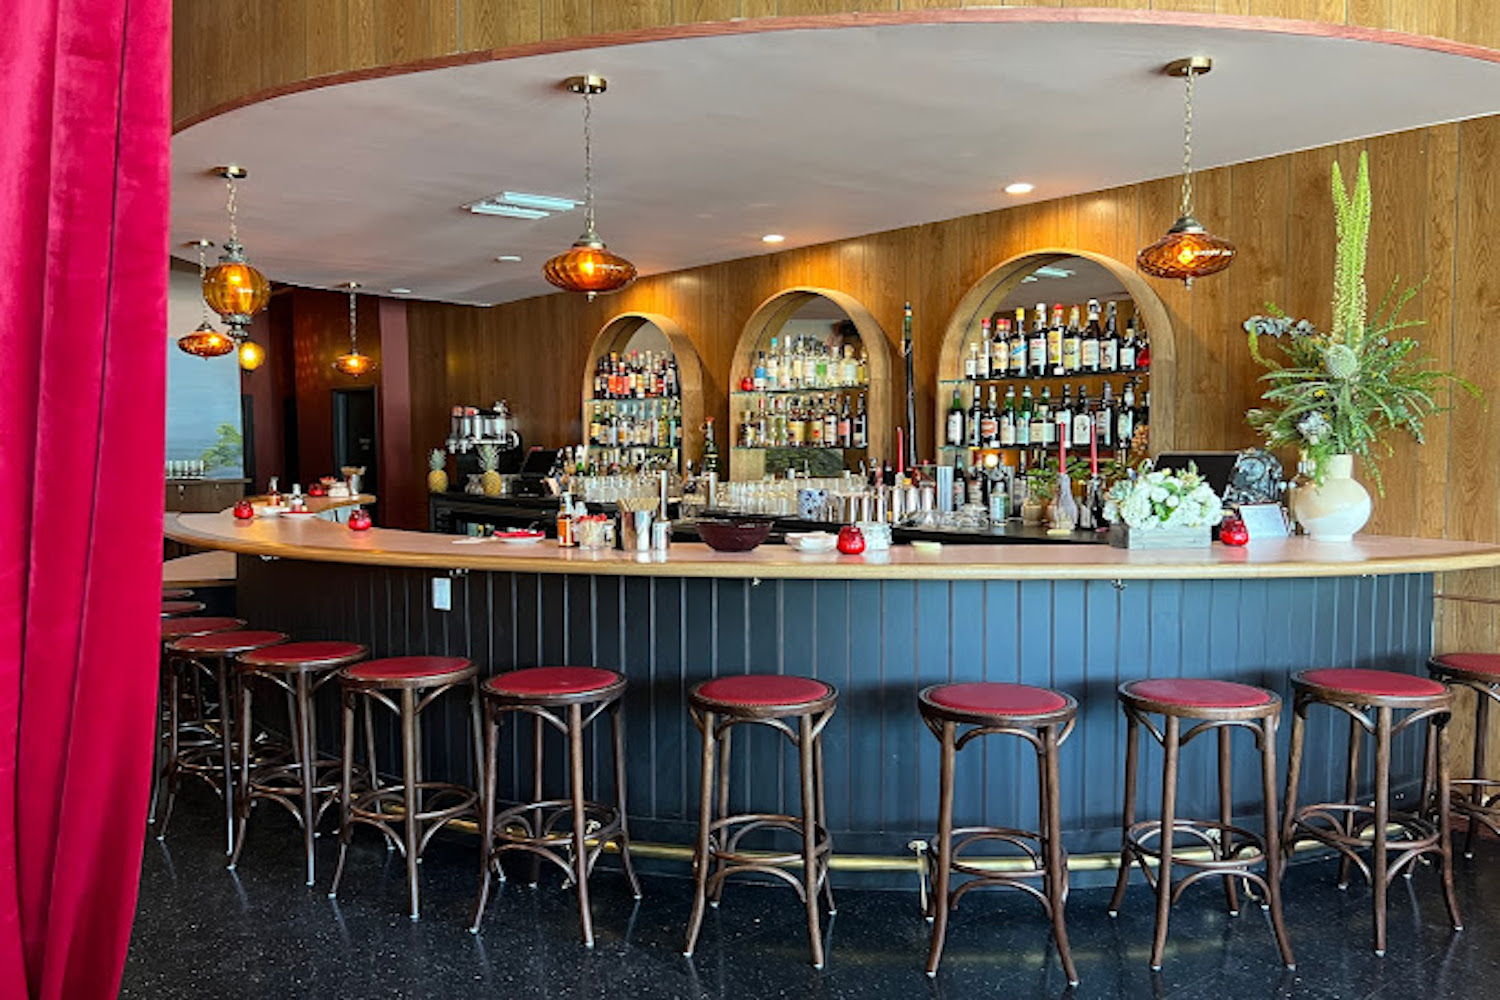 Bar area with arches in walls for bottles and red bar stools.